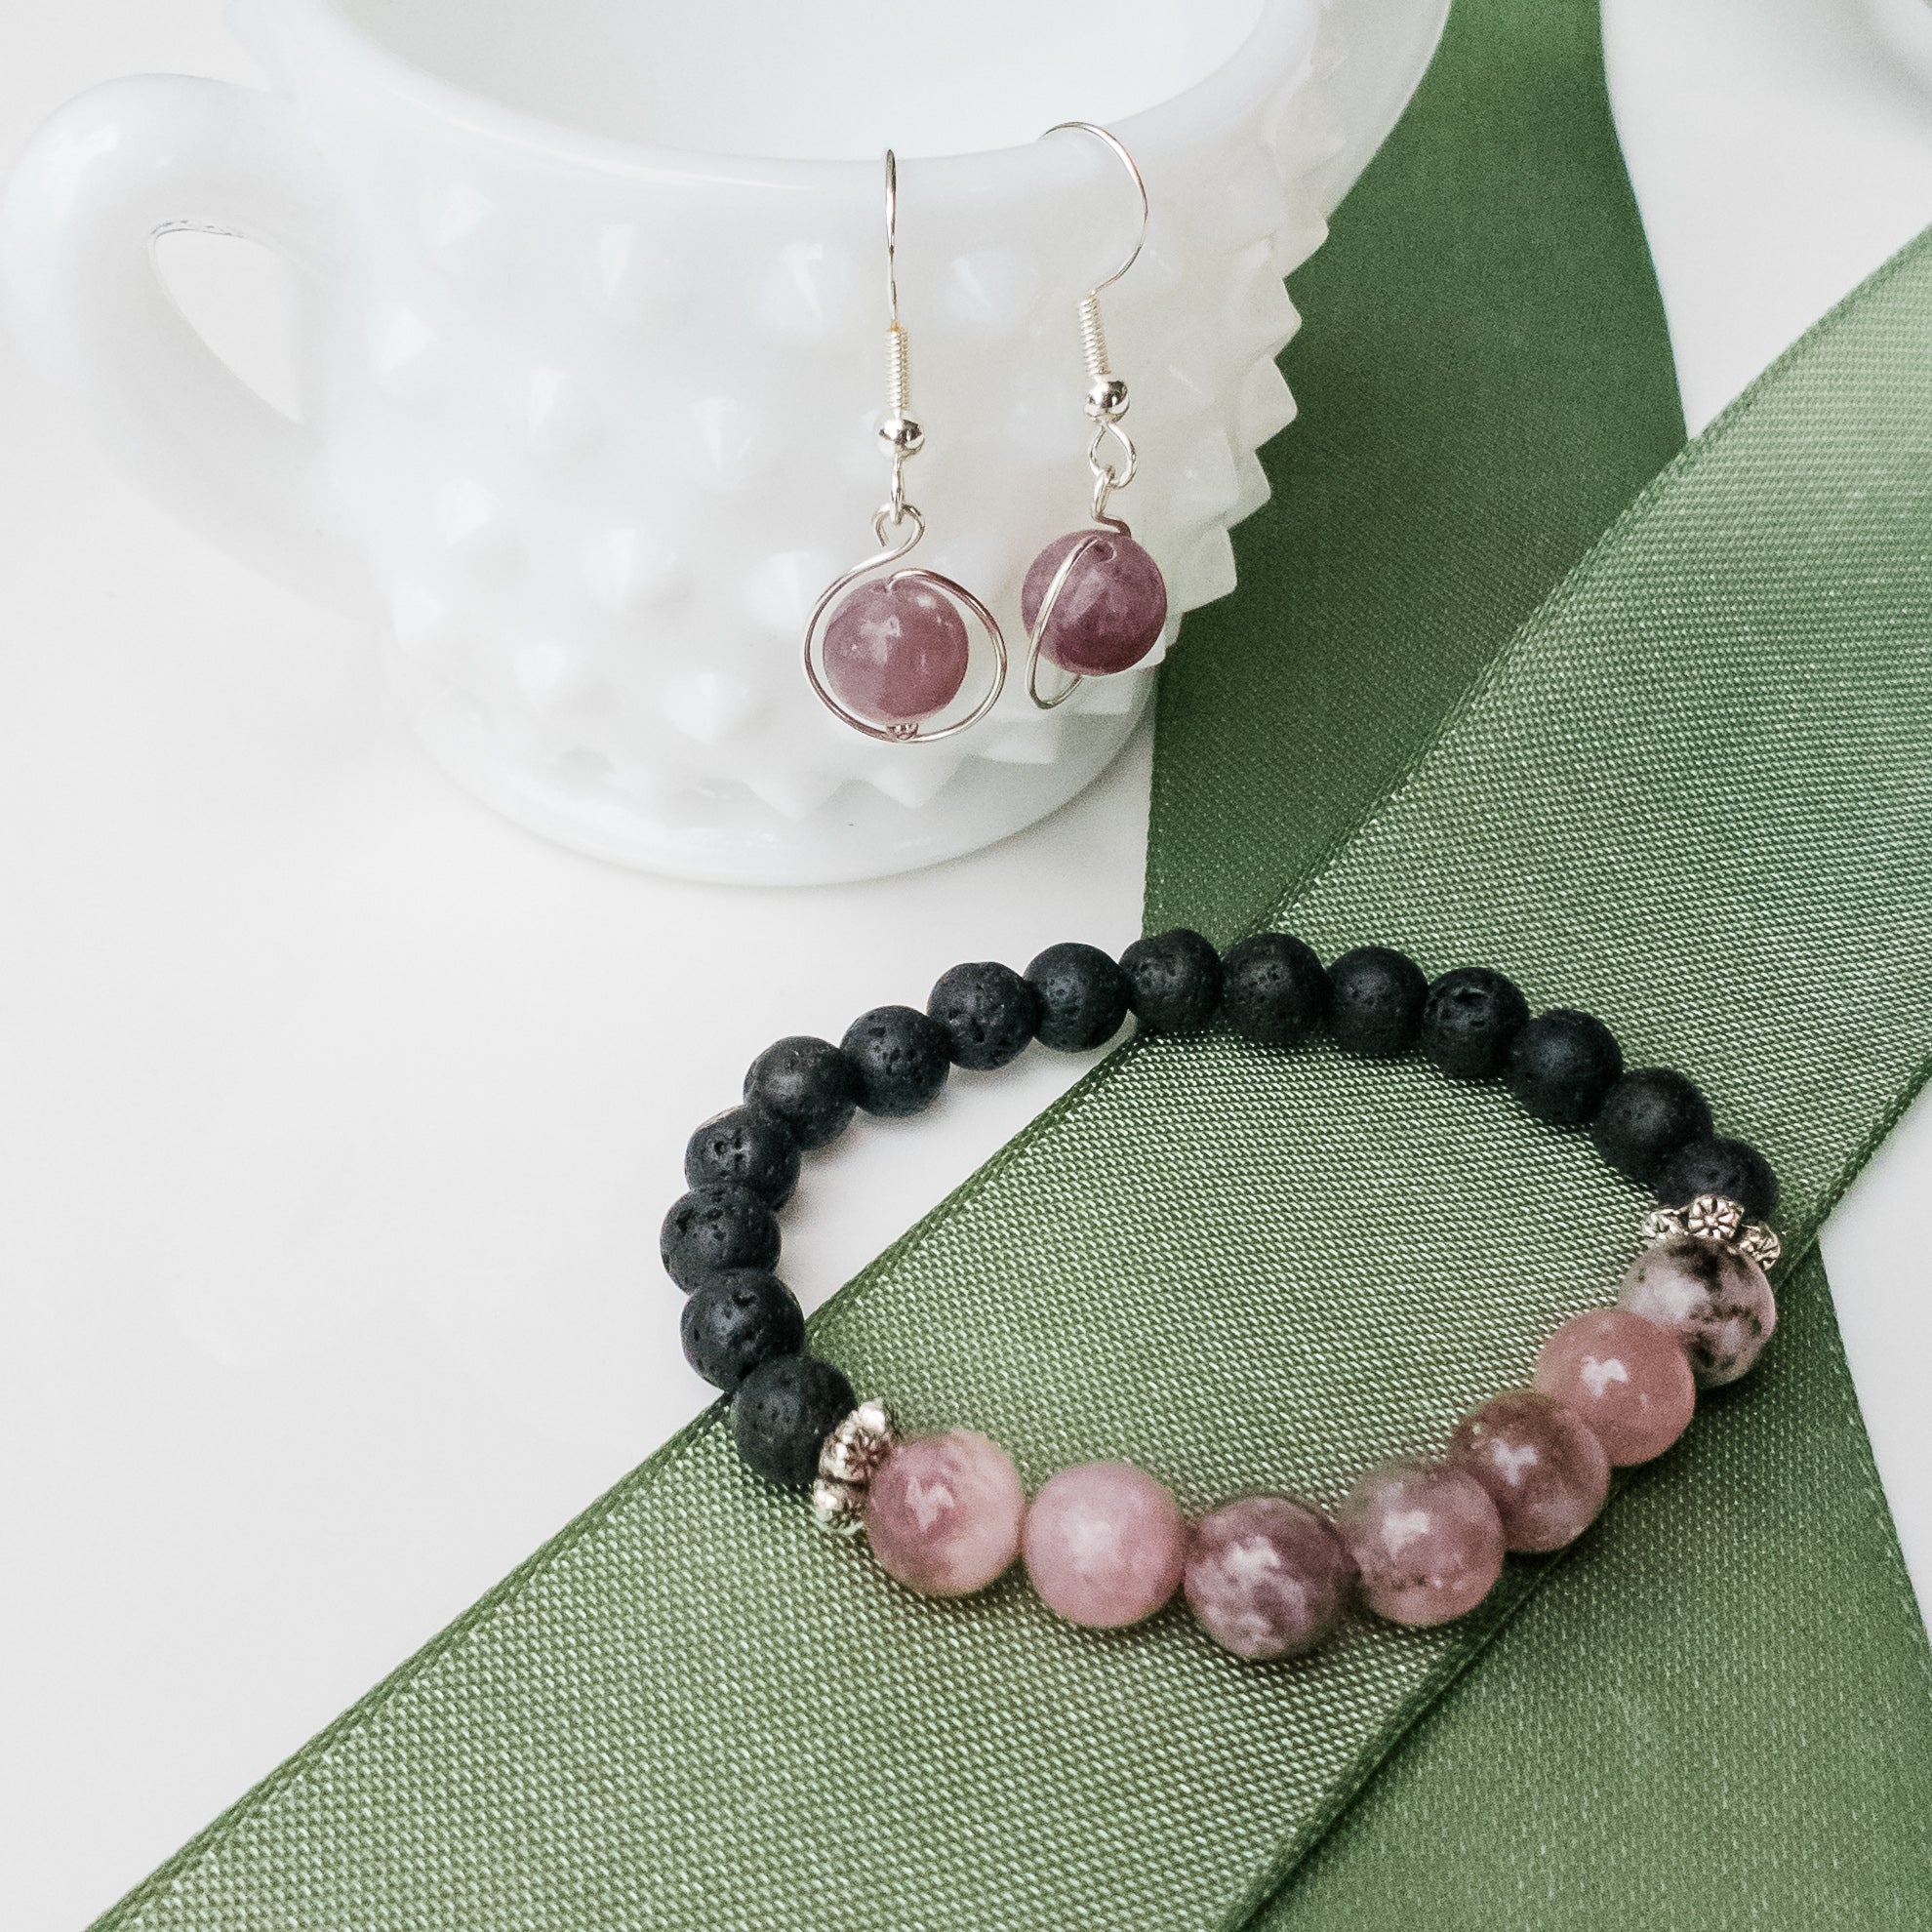 Beautiful Lavender Quartz and Lava Stone Bracelet shown with matching earrings, sold separately - BellaChel Jeweler